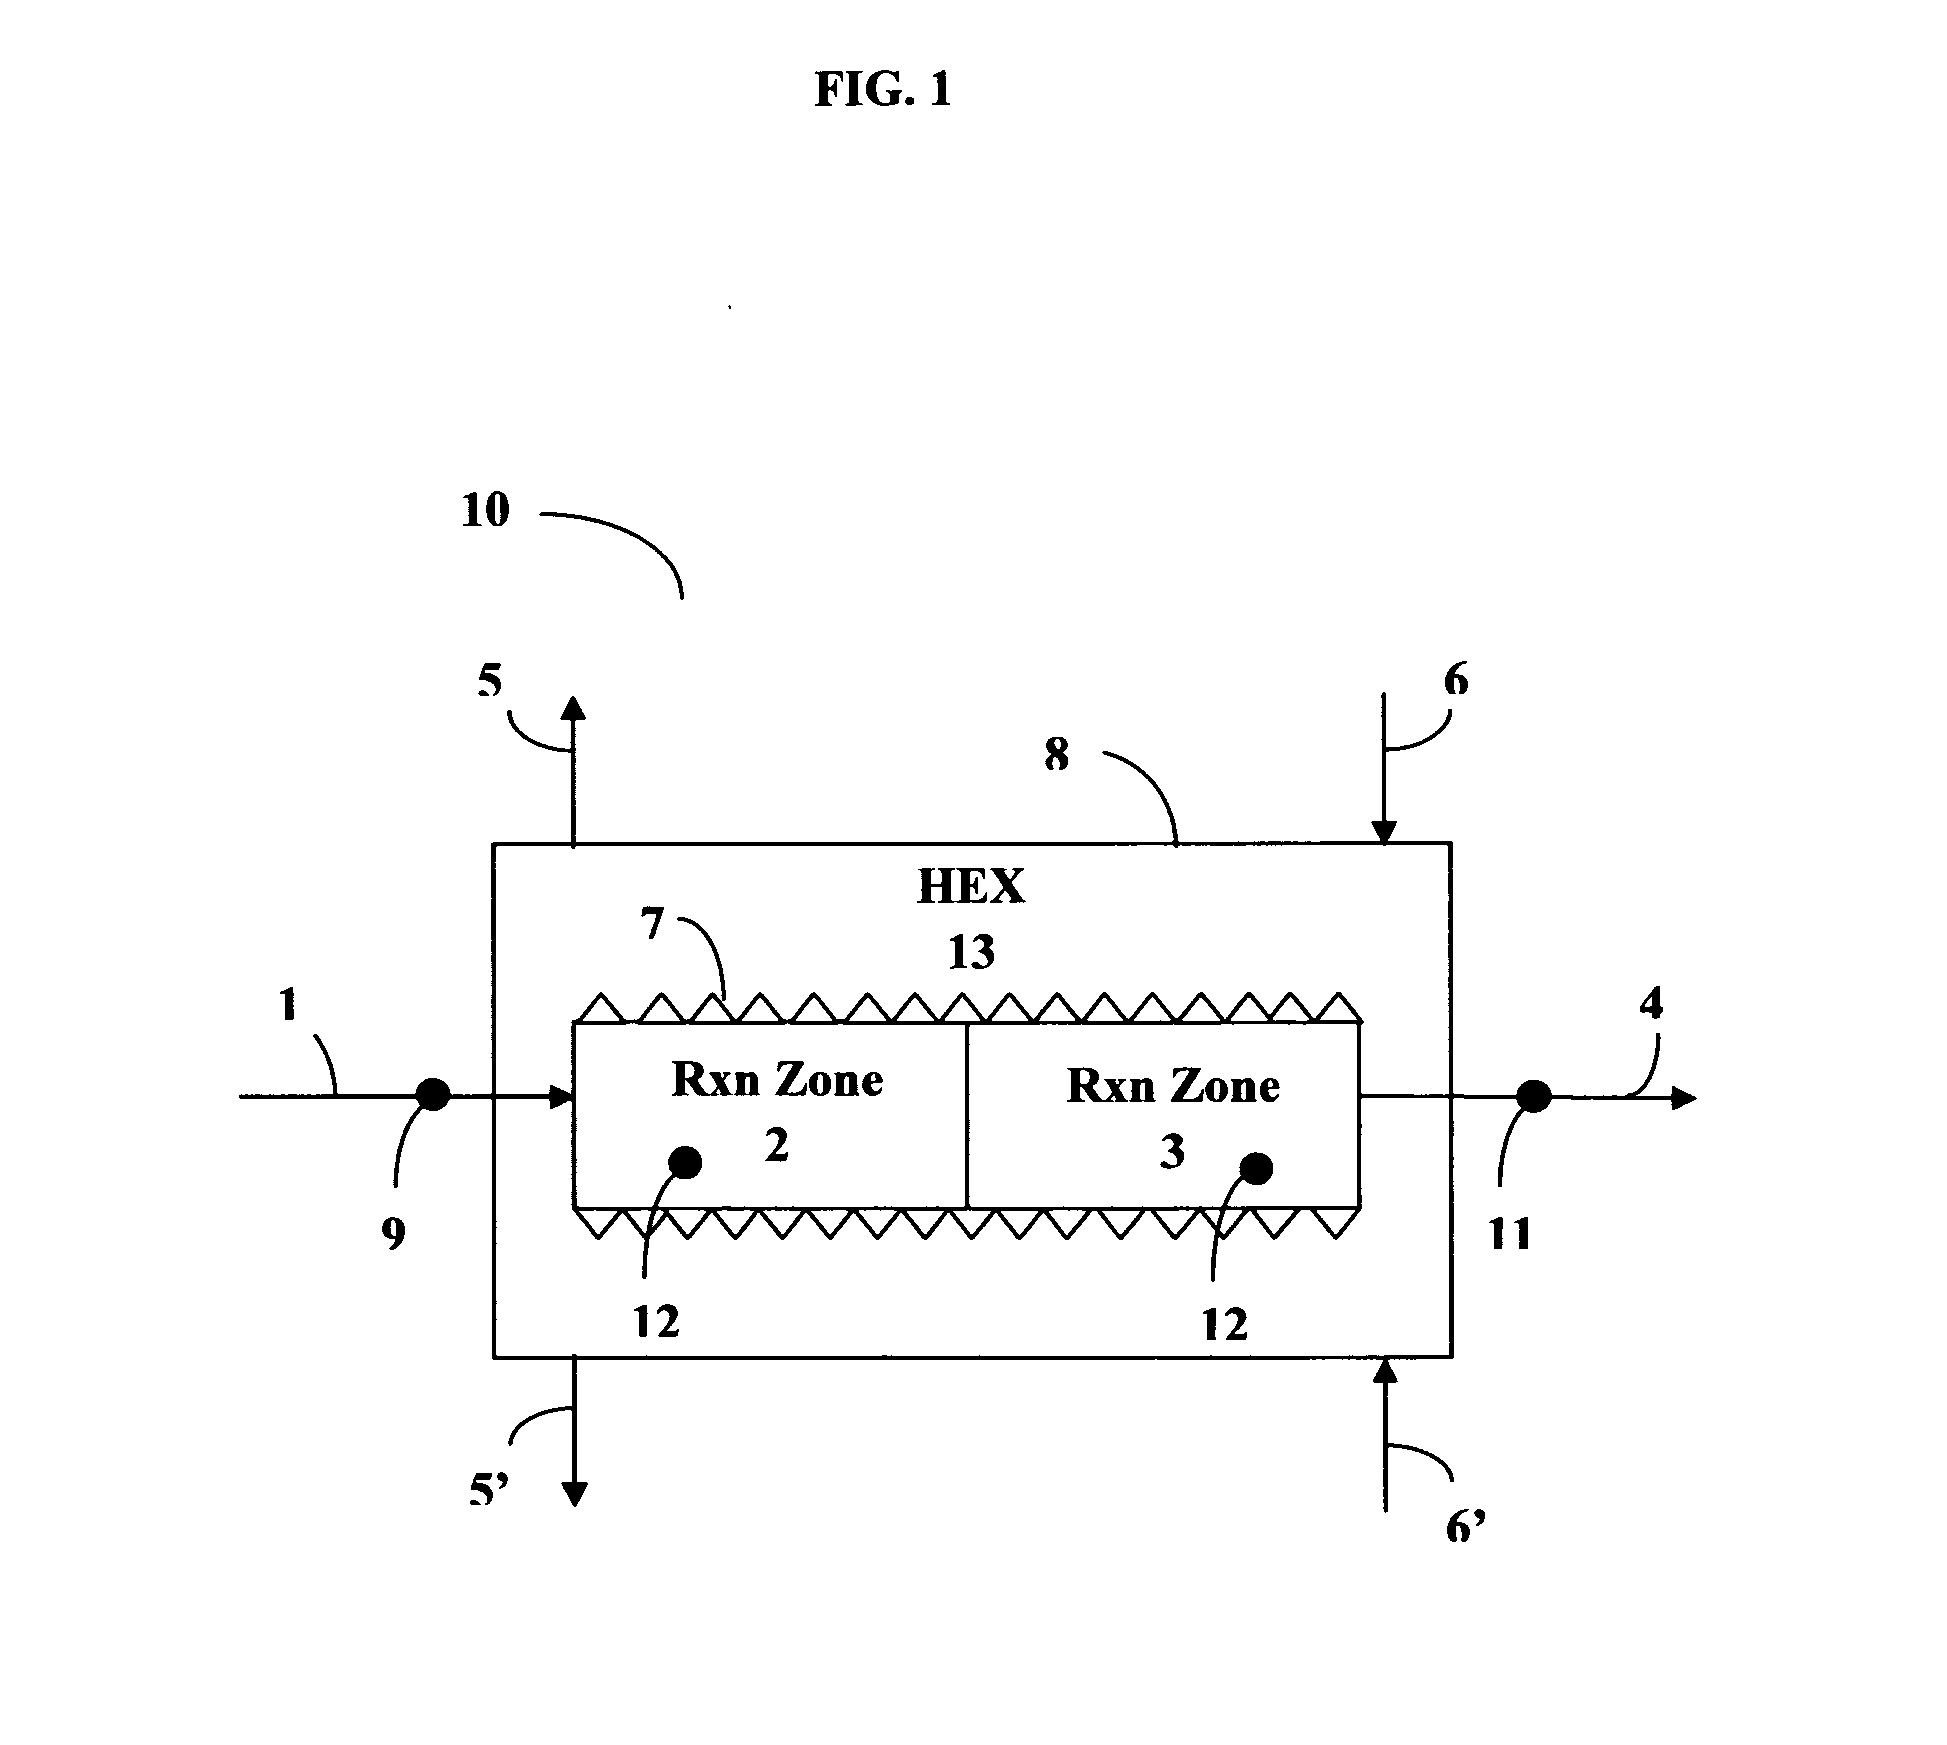 Sabatier process and apparatus for controlling exothermic reaction